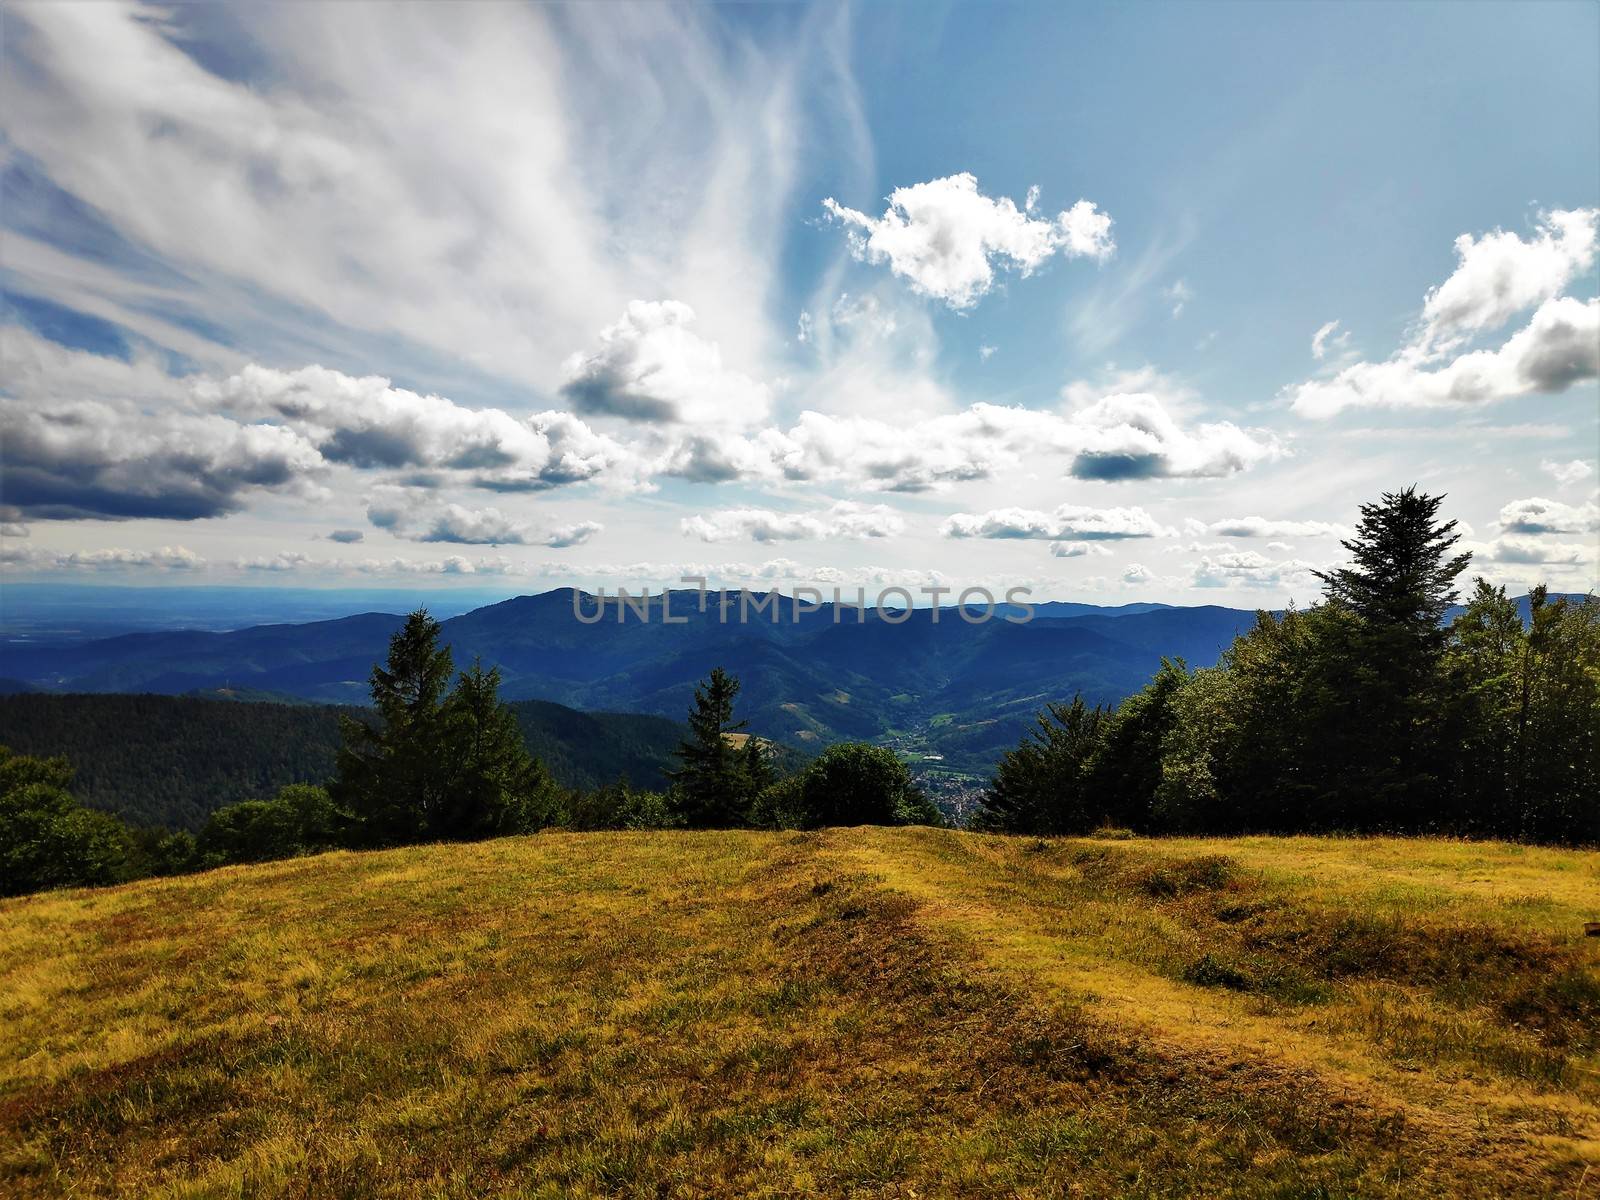 Outlook from the Trehkopf view point over the hills of the Vosges region, France